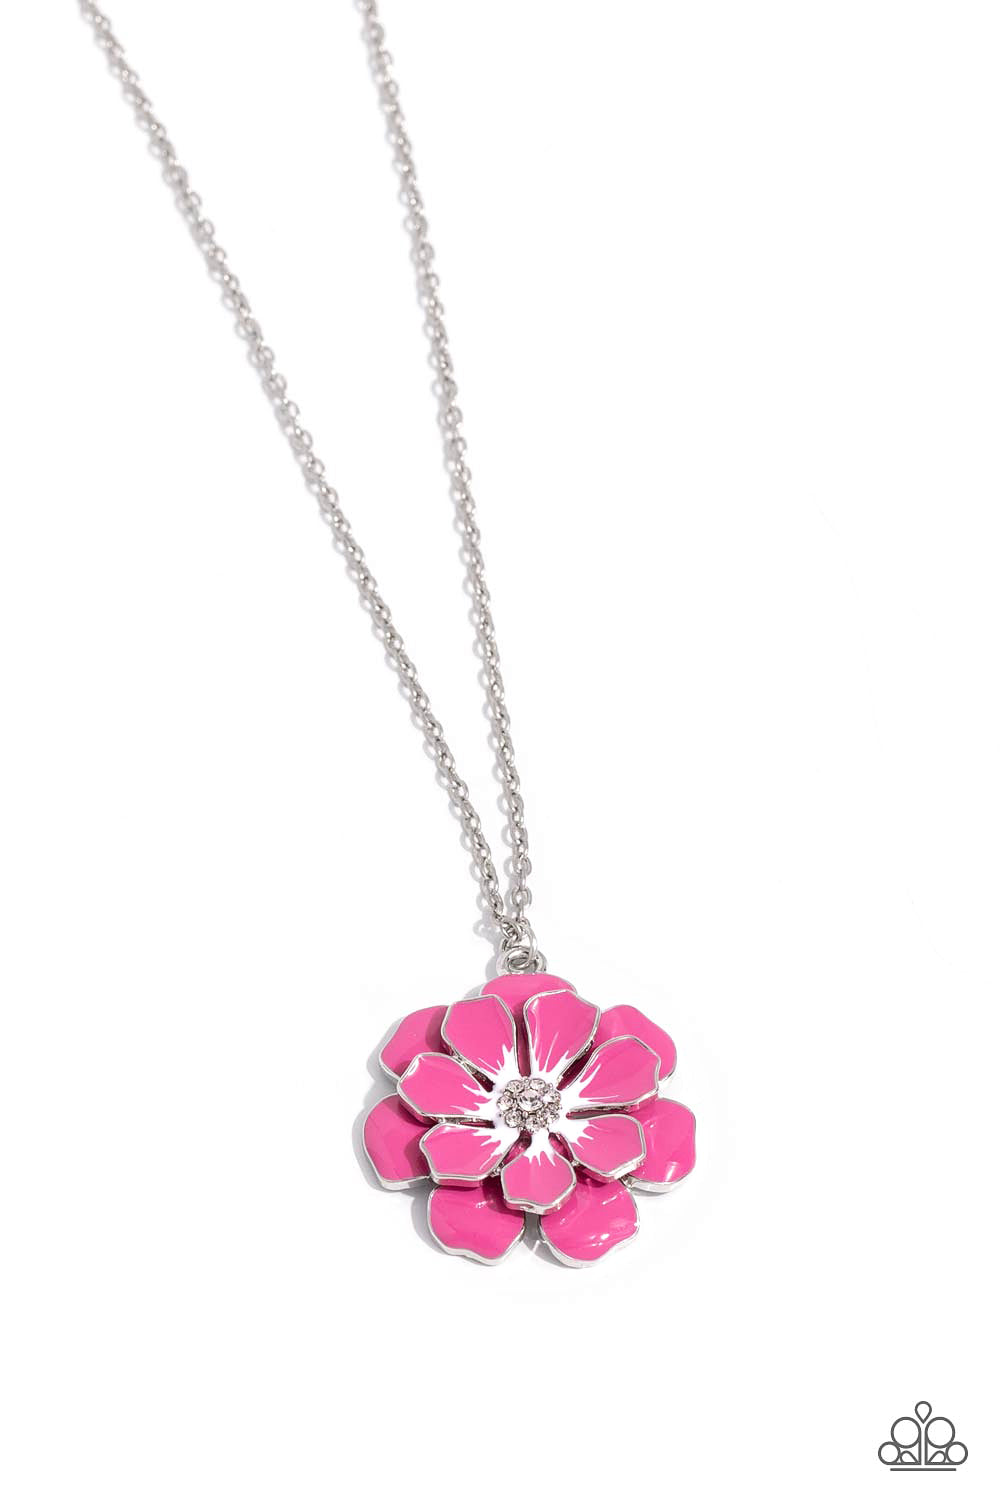 Beyond Blooming - pink - Paparazzi necklace